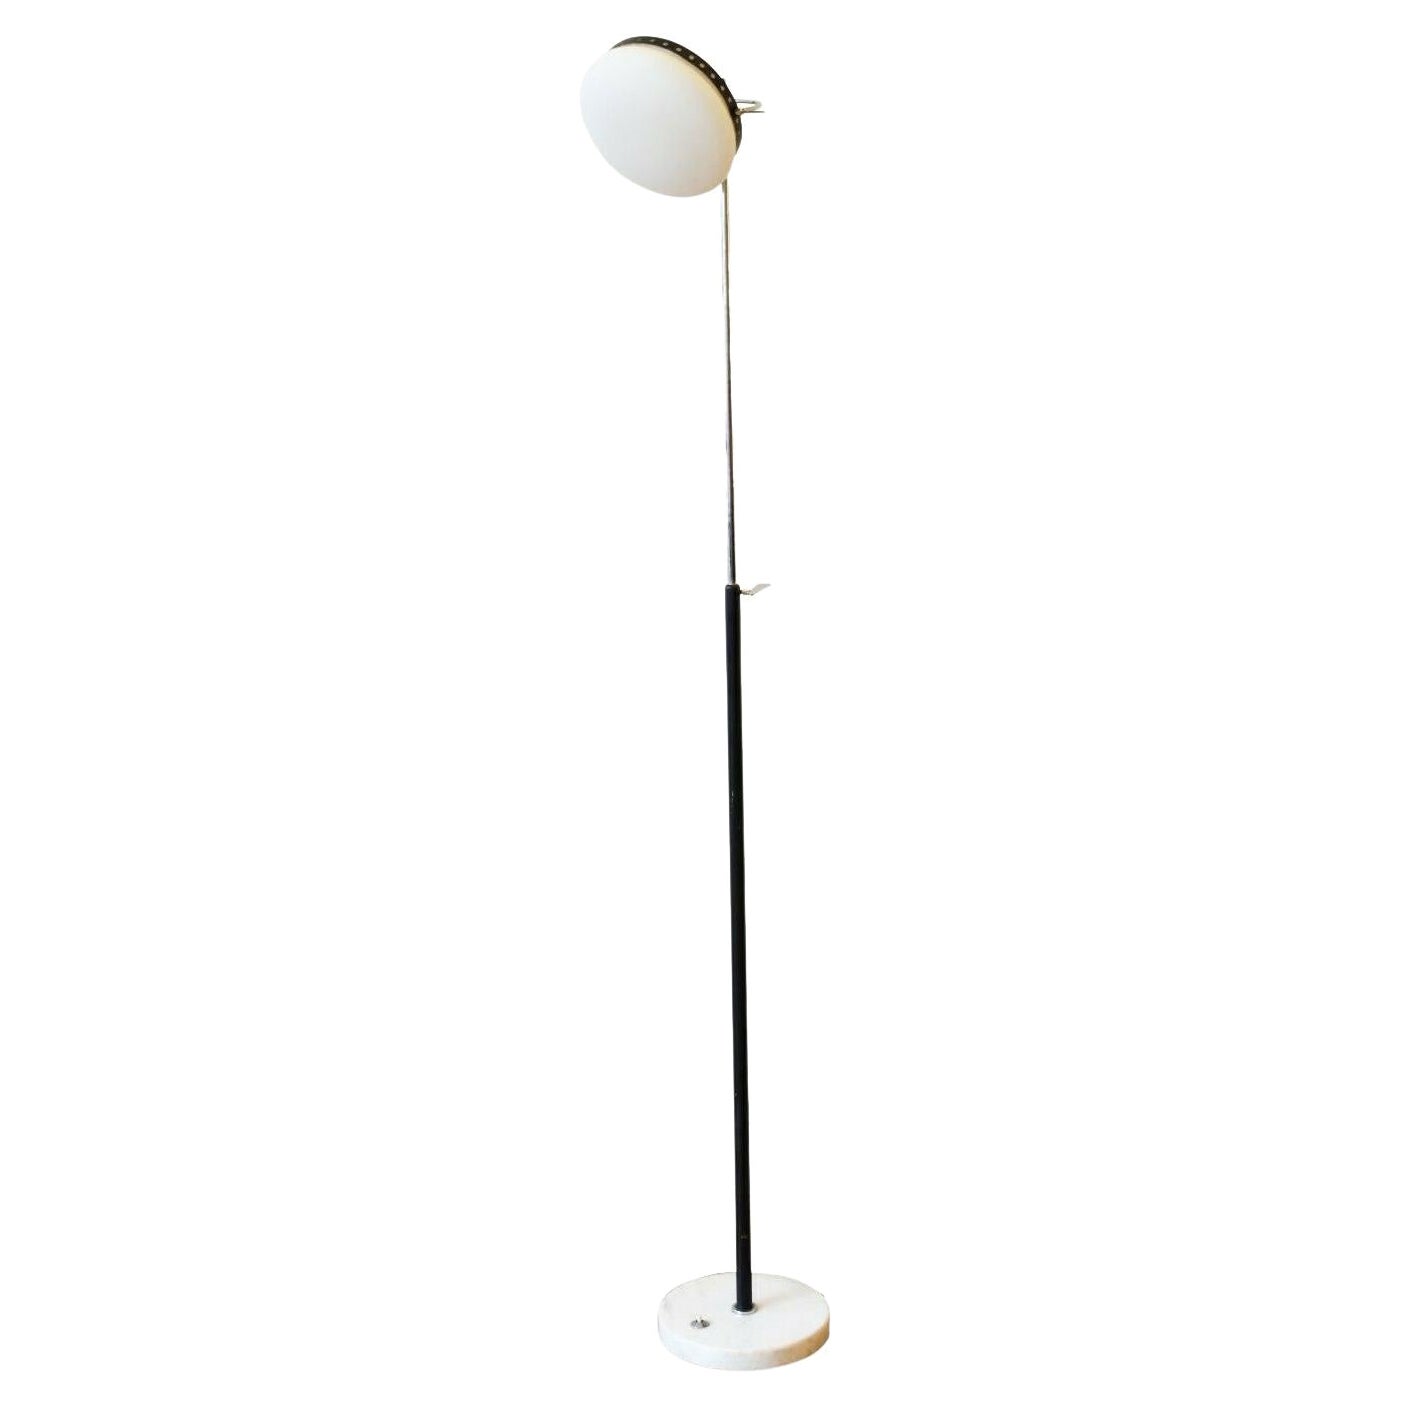 Italian 1950s Chrome Floor Lamp with Frosted Glass, Marble Base by Stillux For Sale